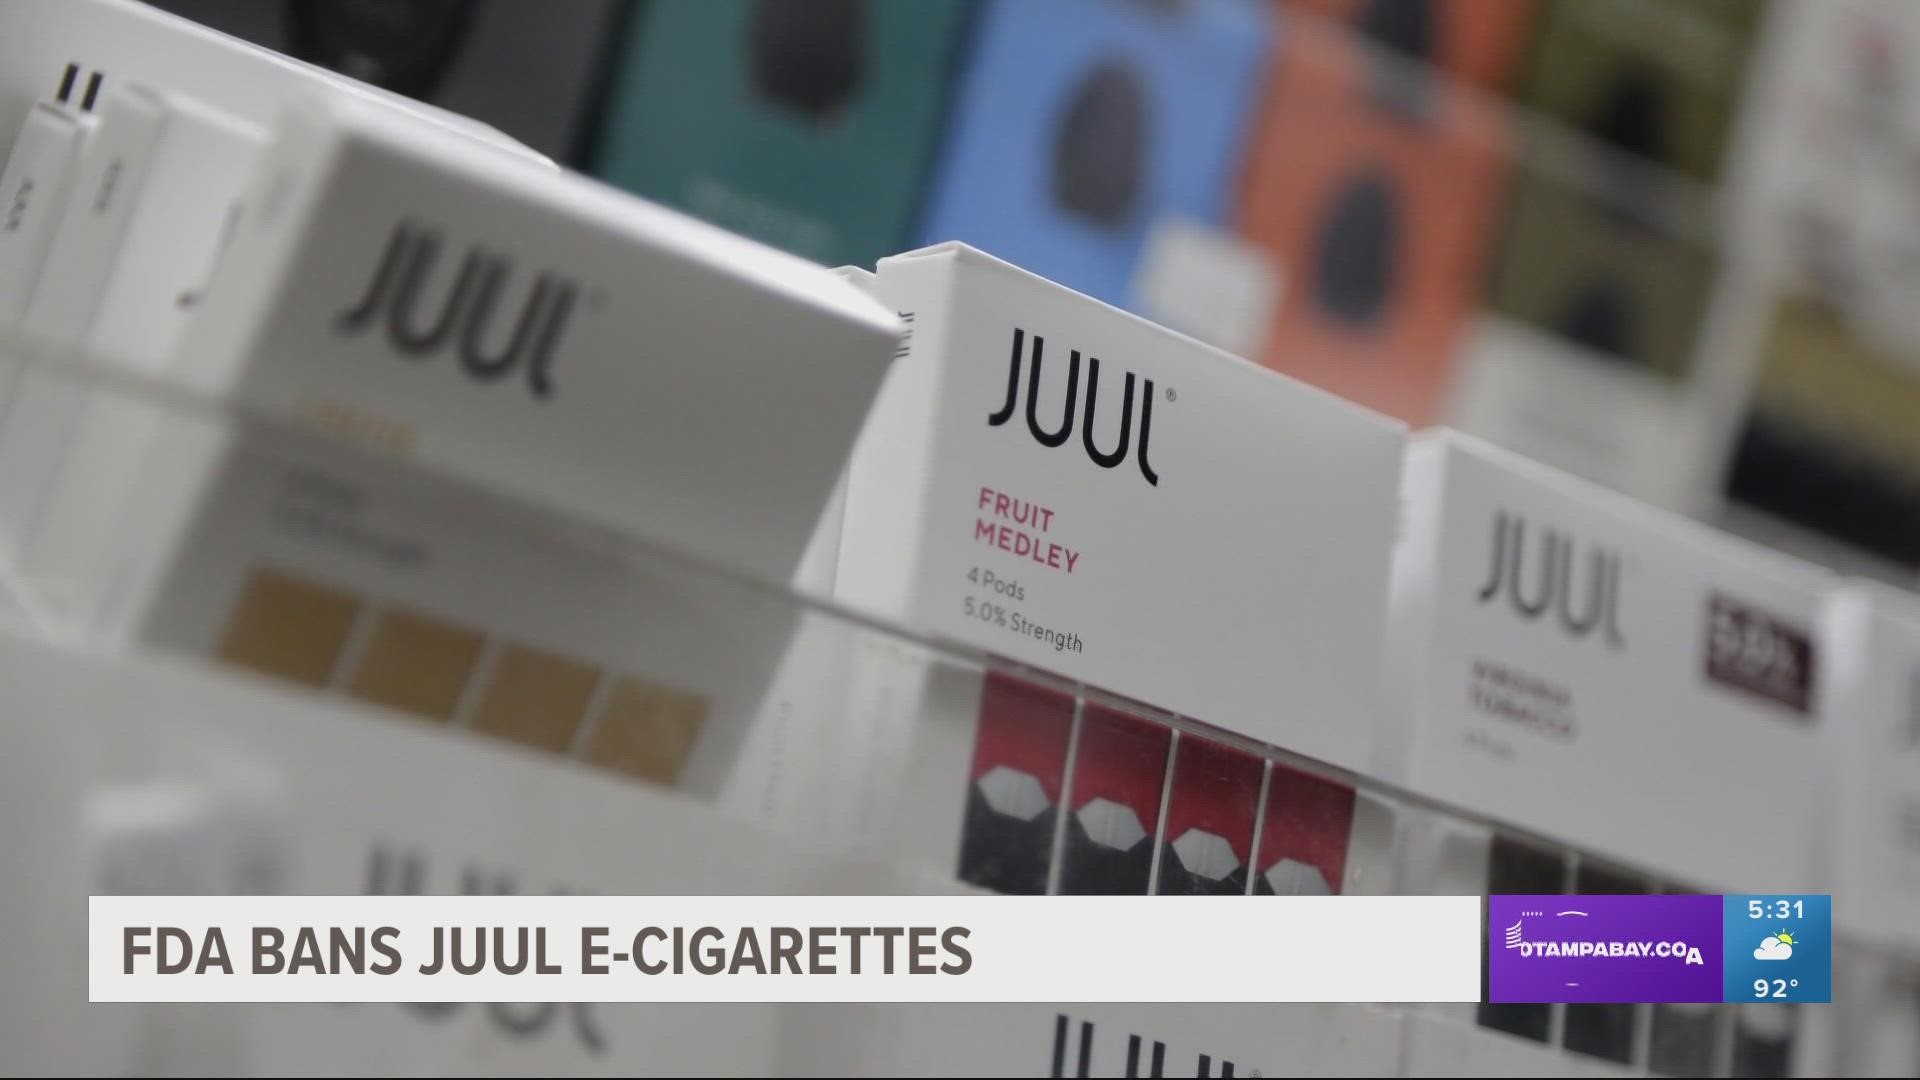 Parents, politicians and anti-tobacco advocates wanted a ban on the Juul devices that many blame for the rise in underage vaping.